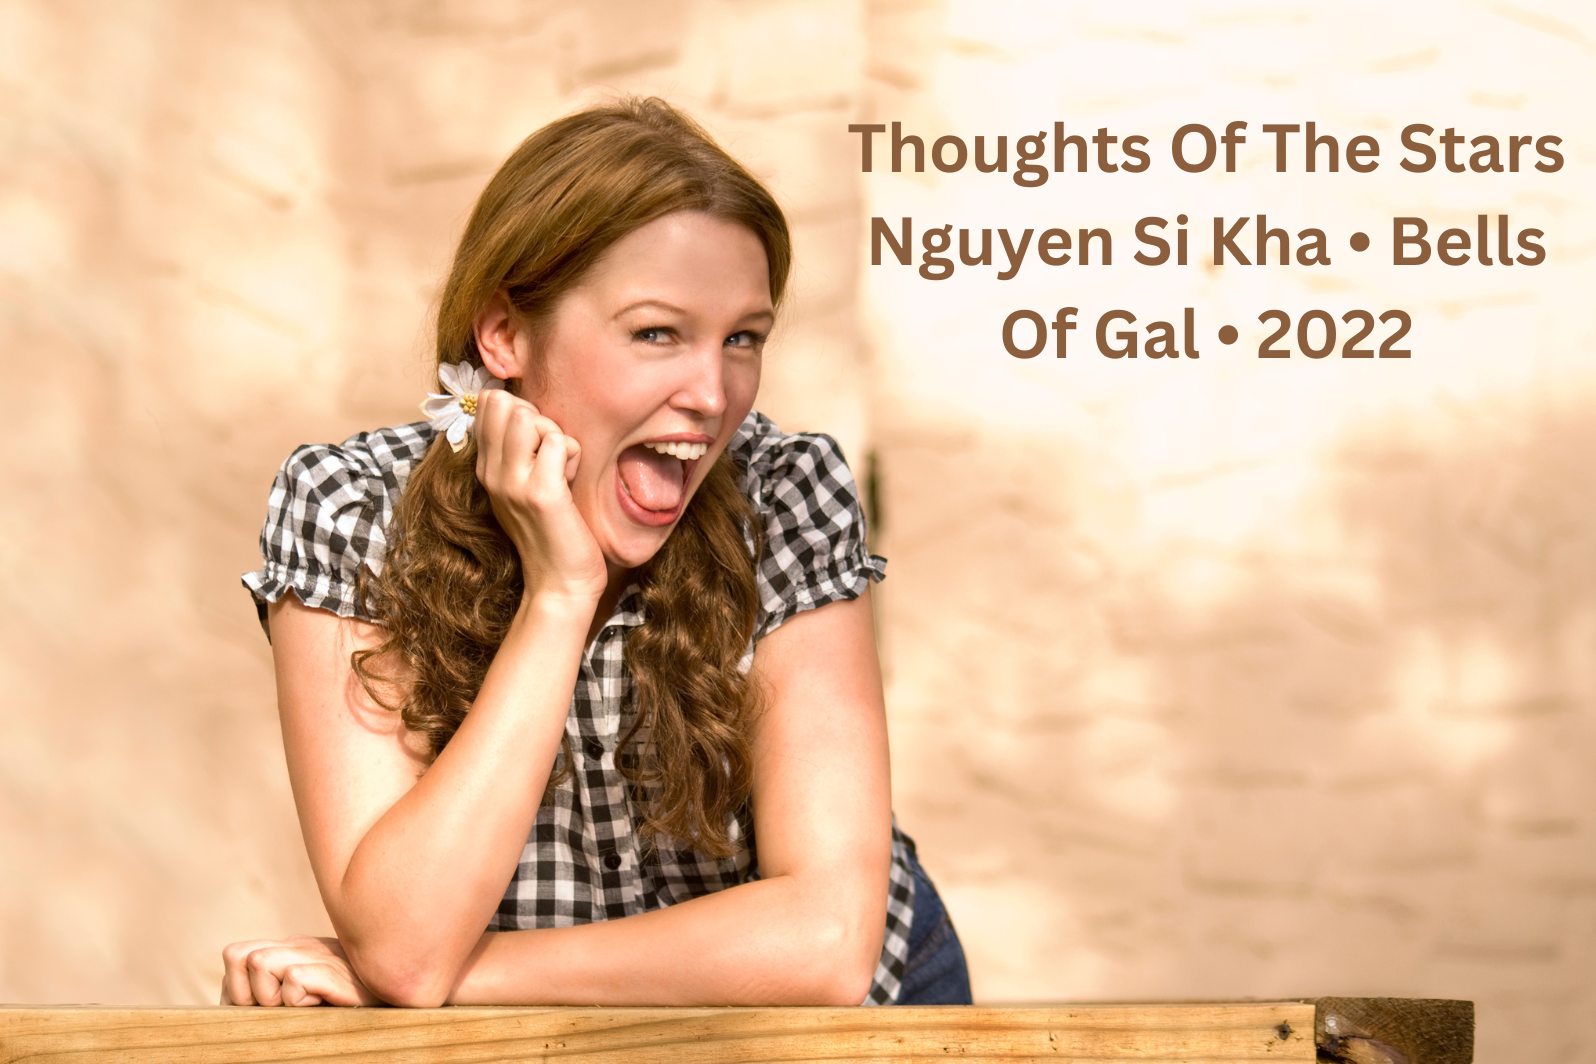 Thoughts Of The Stars Nguyen Si Kha • Bells Of Gal • 2022